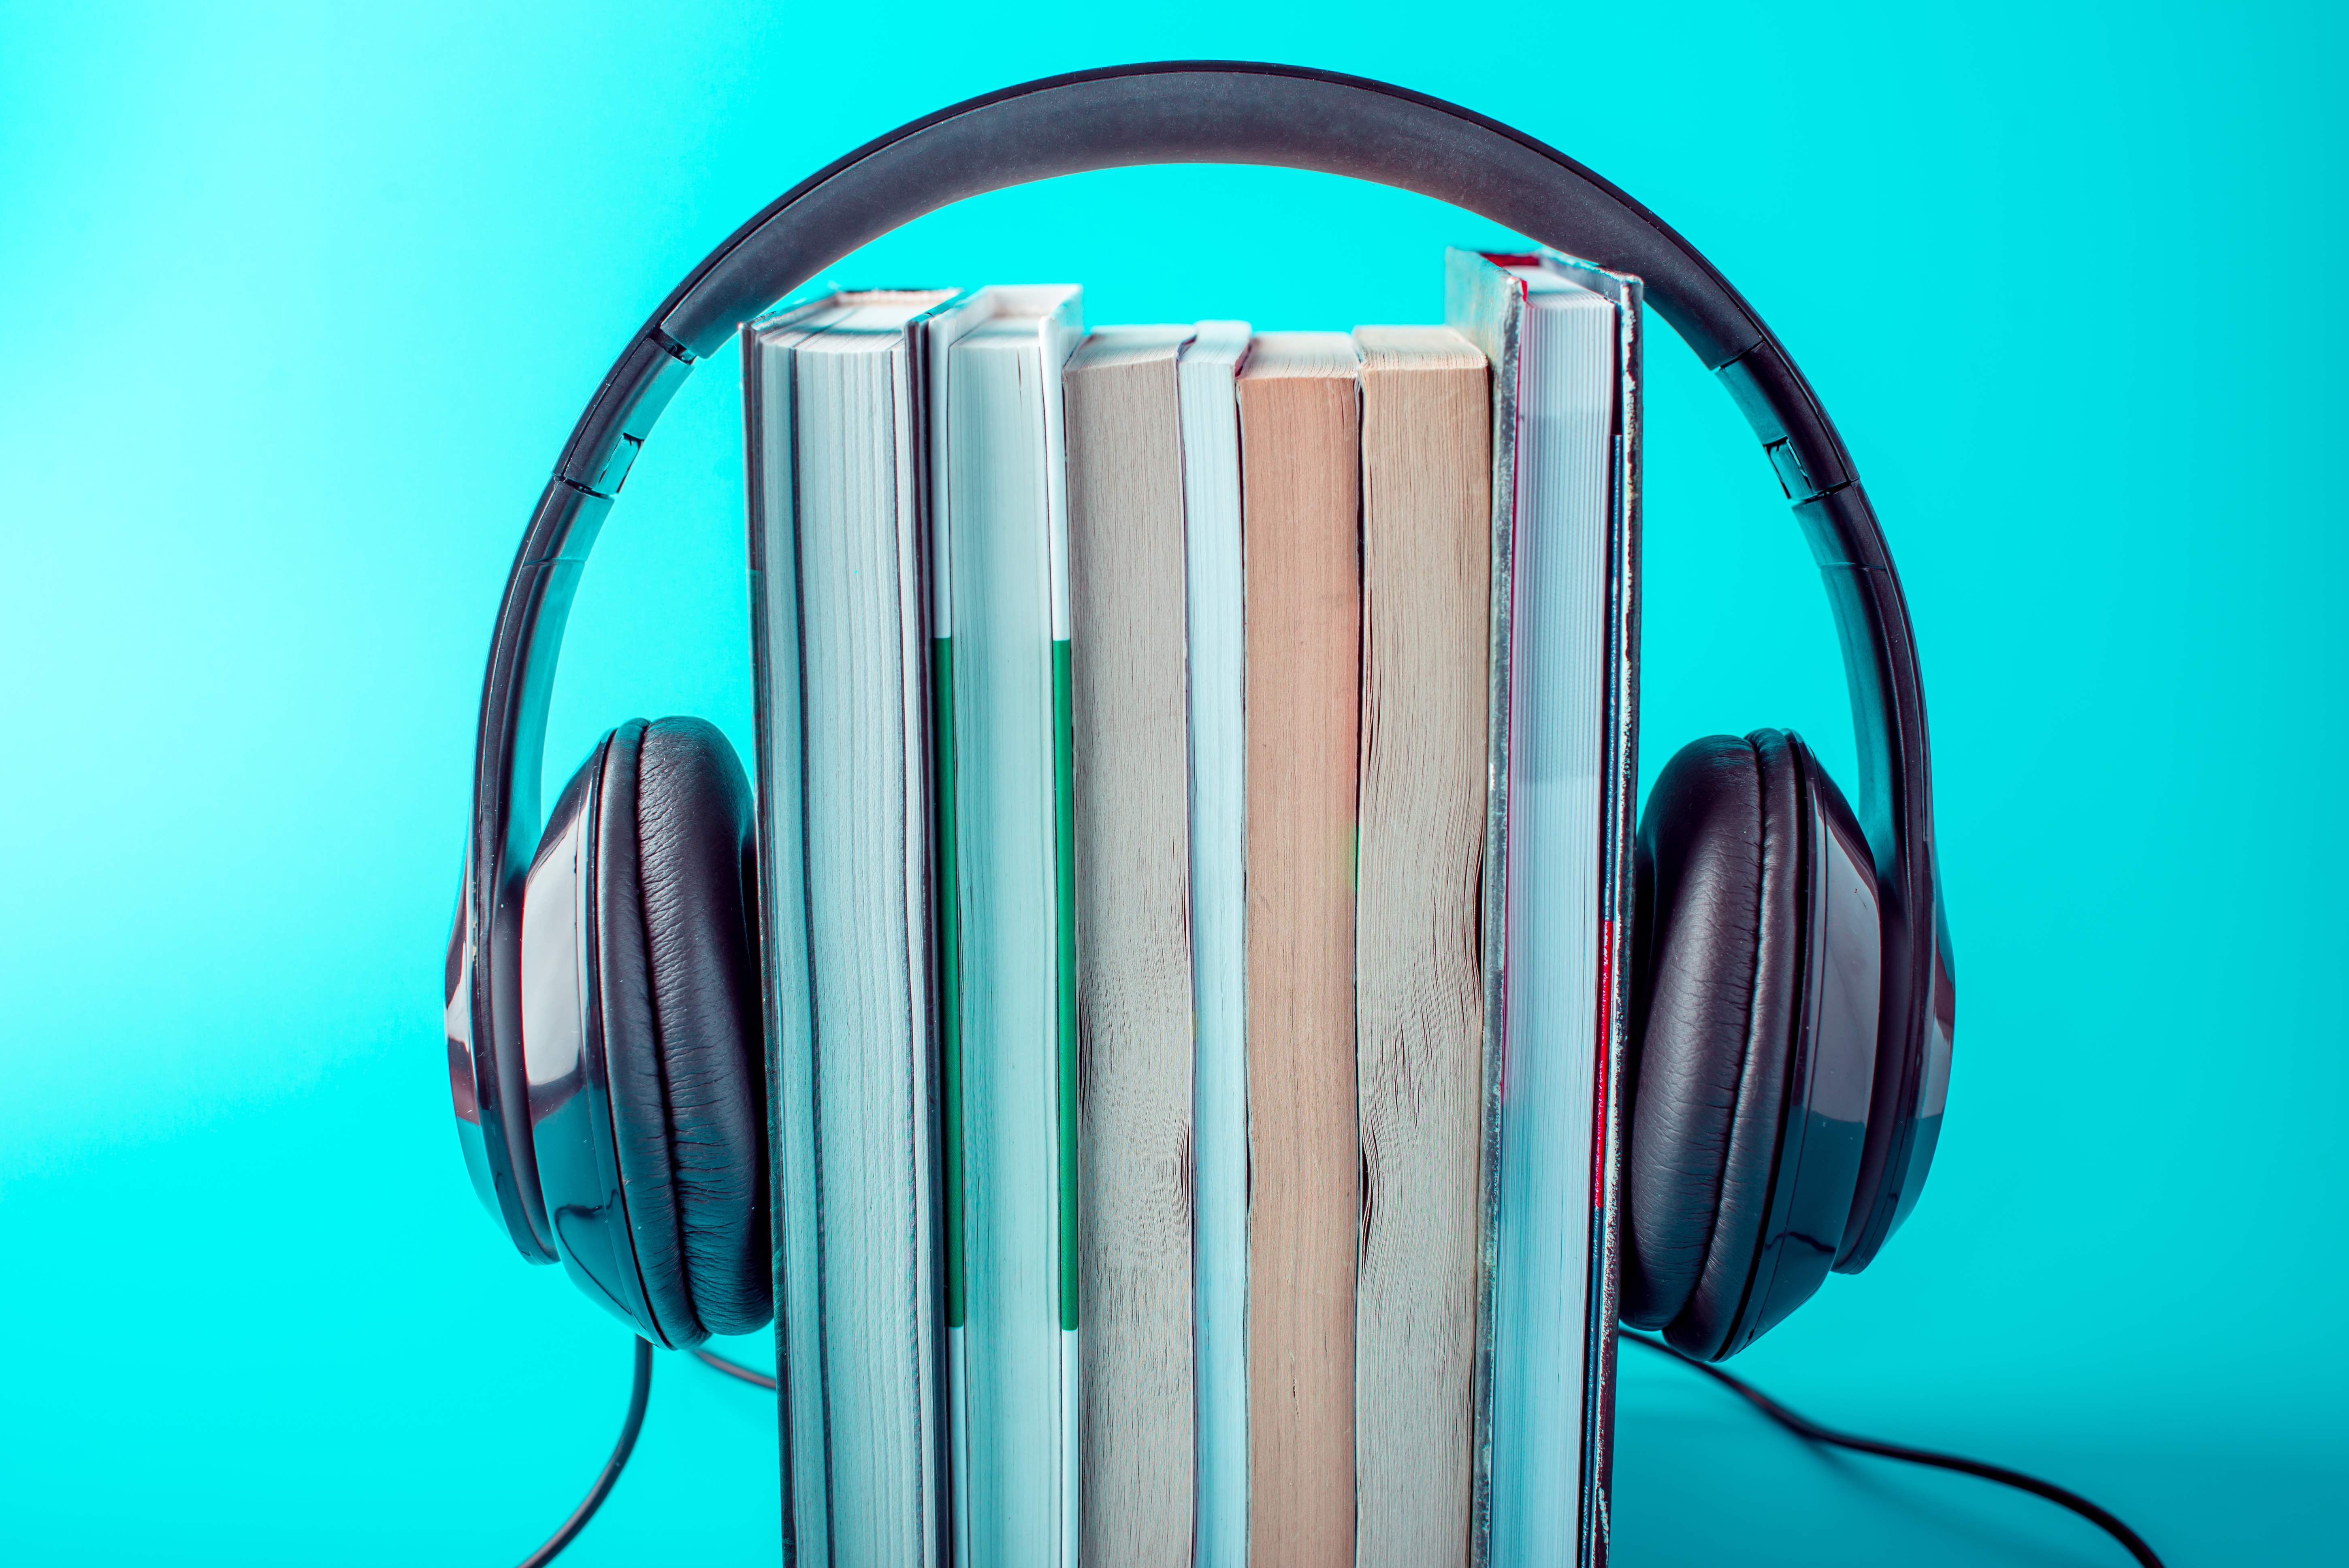 Are audiobooks healthy?